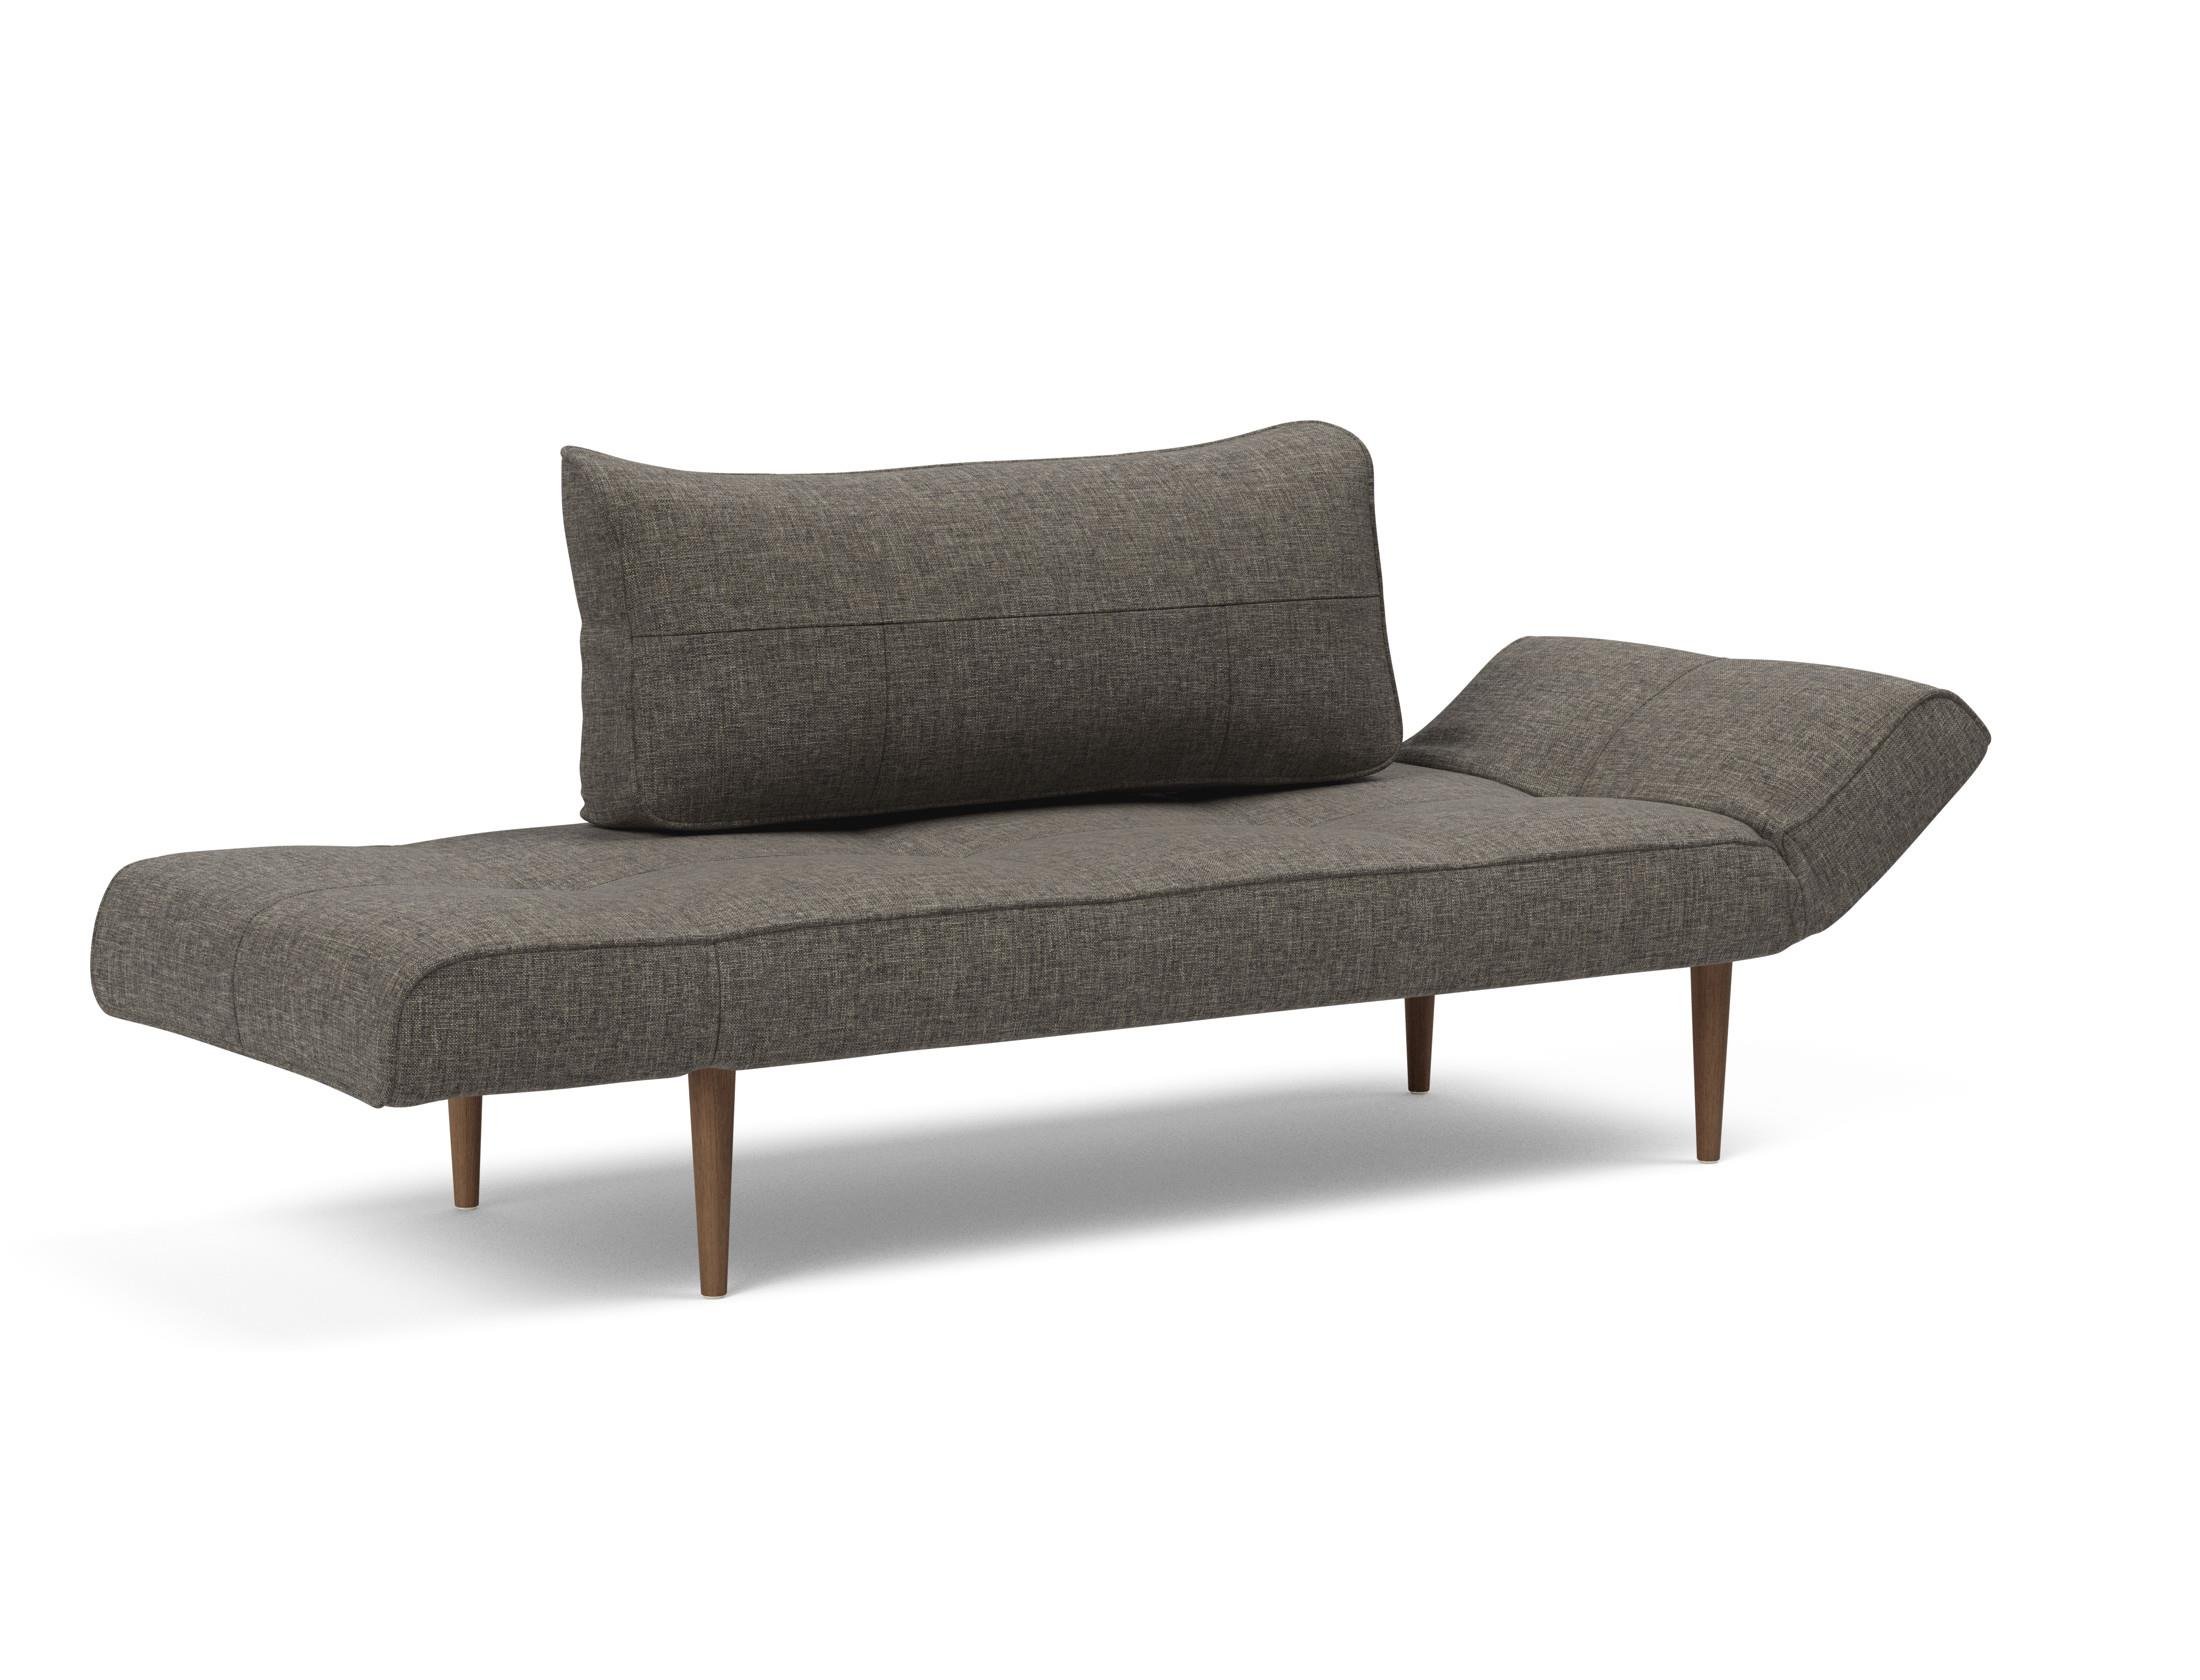 Zeal-Styletto-Daybed-216-p6-web.jpg